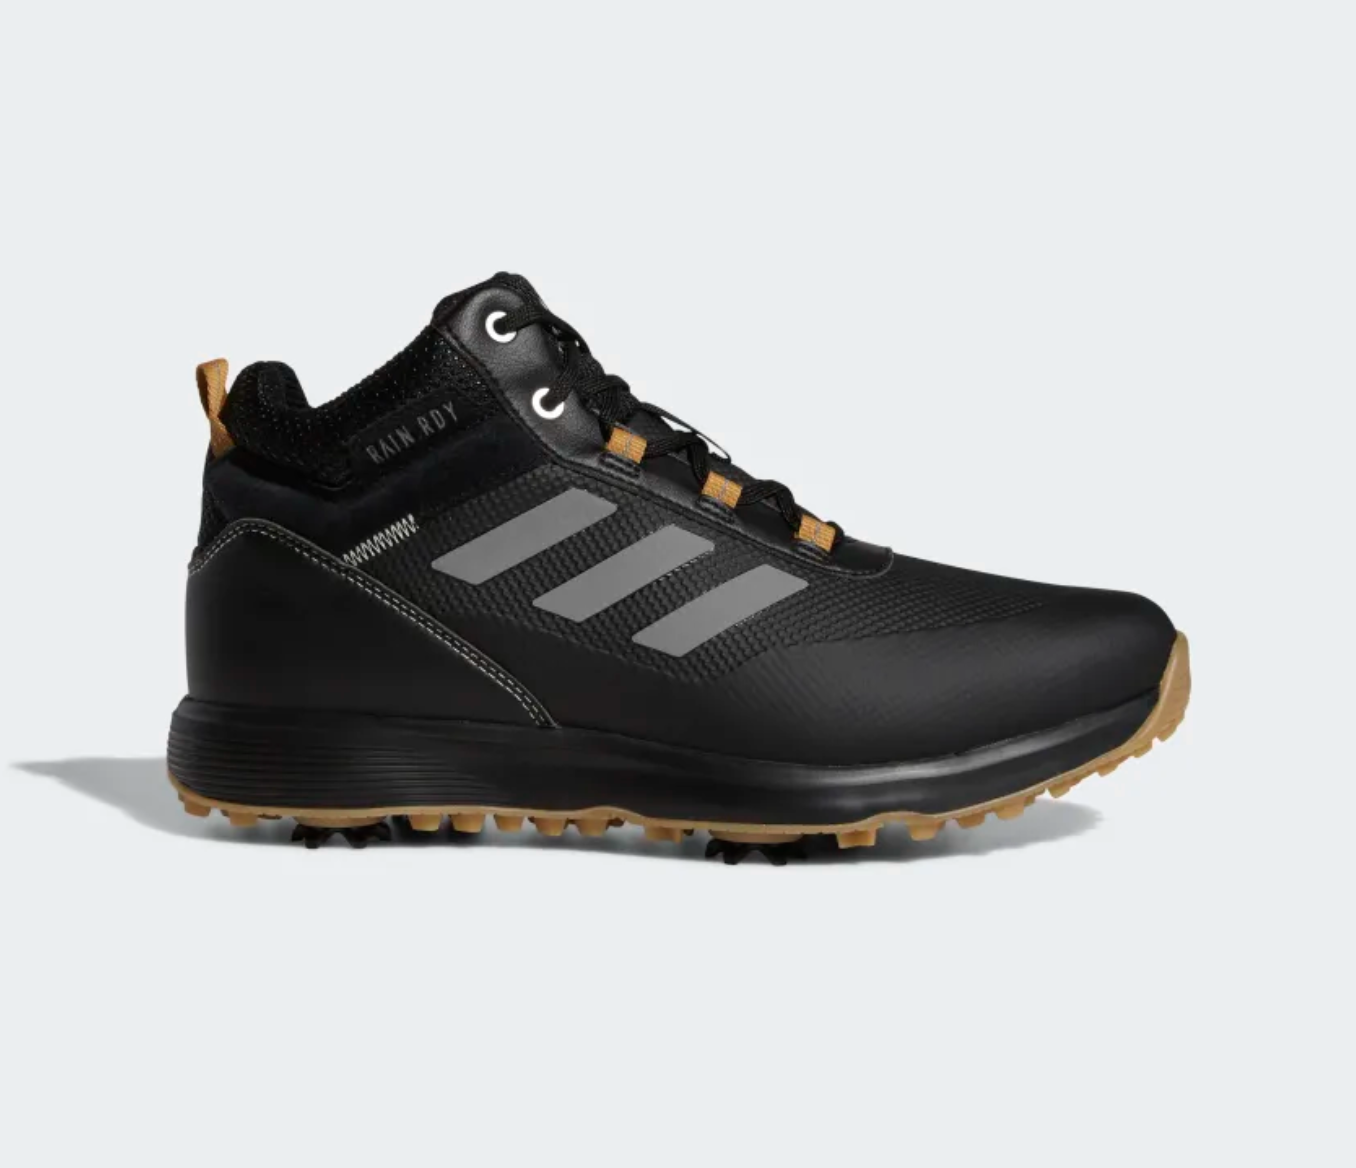 Adidas S2G Recycled Polyester Mid-Cut Golf Shoes